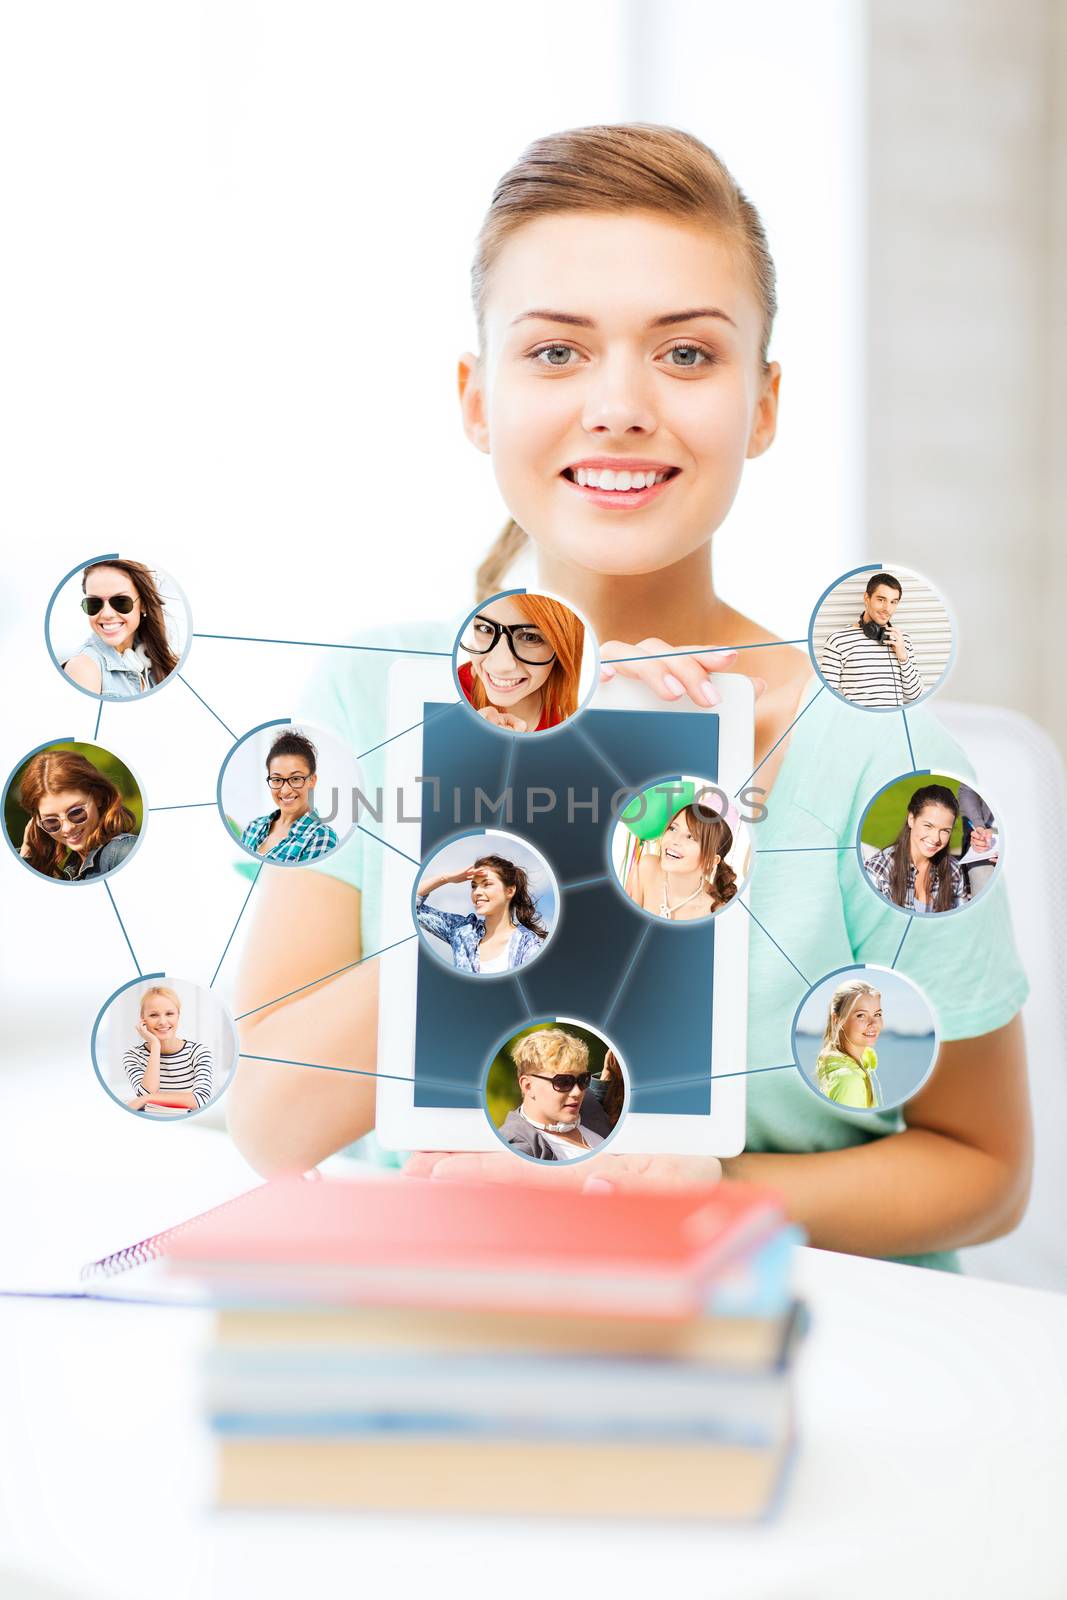 education, social networking, technology and internet concept - smiling student girl with tablet pc